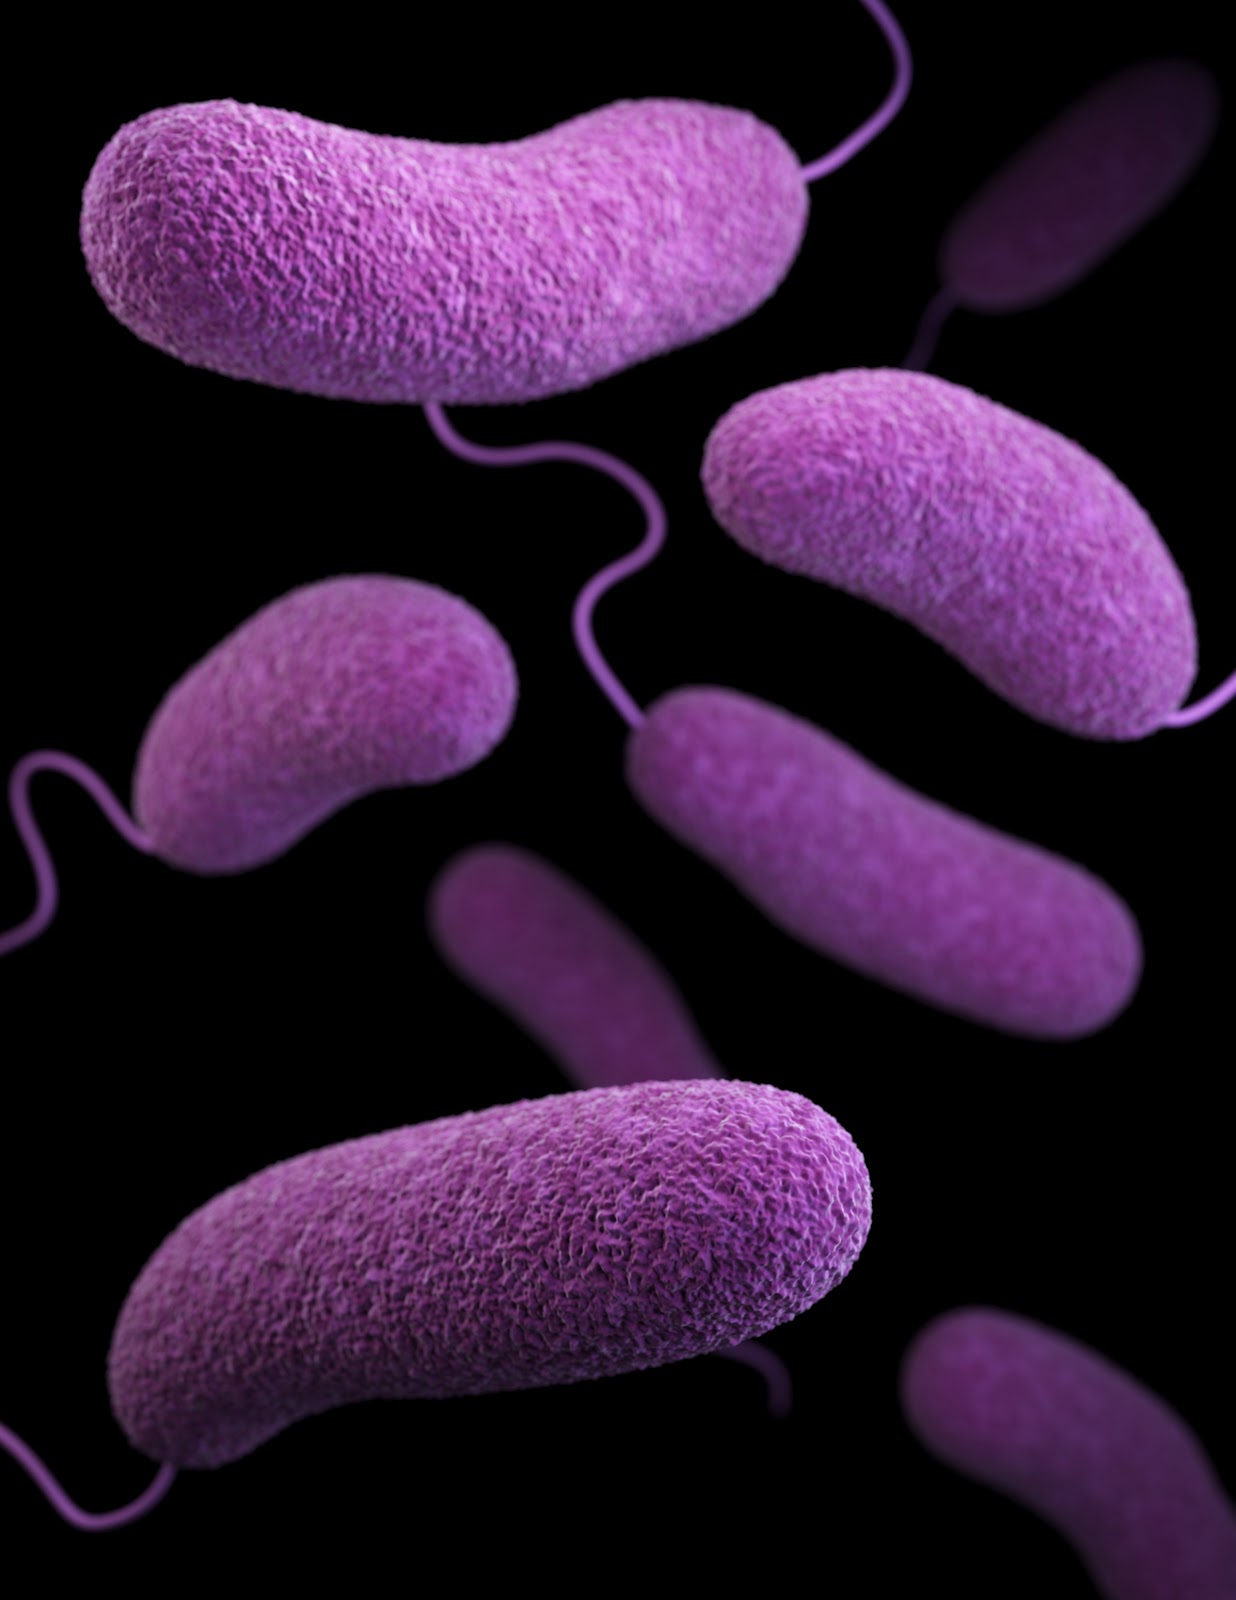 3D image of Bacteria dyed purple representing gut flora in Dysbiosis.